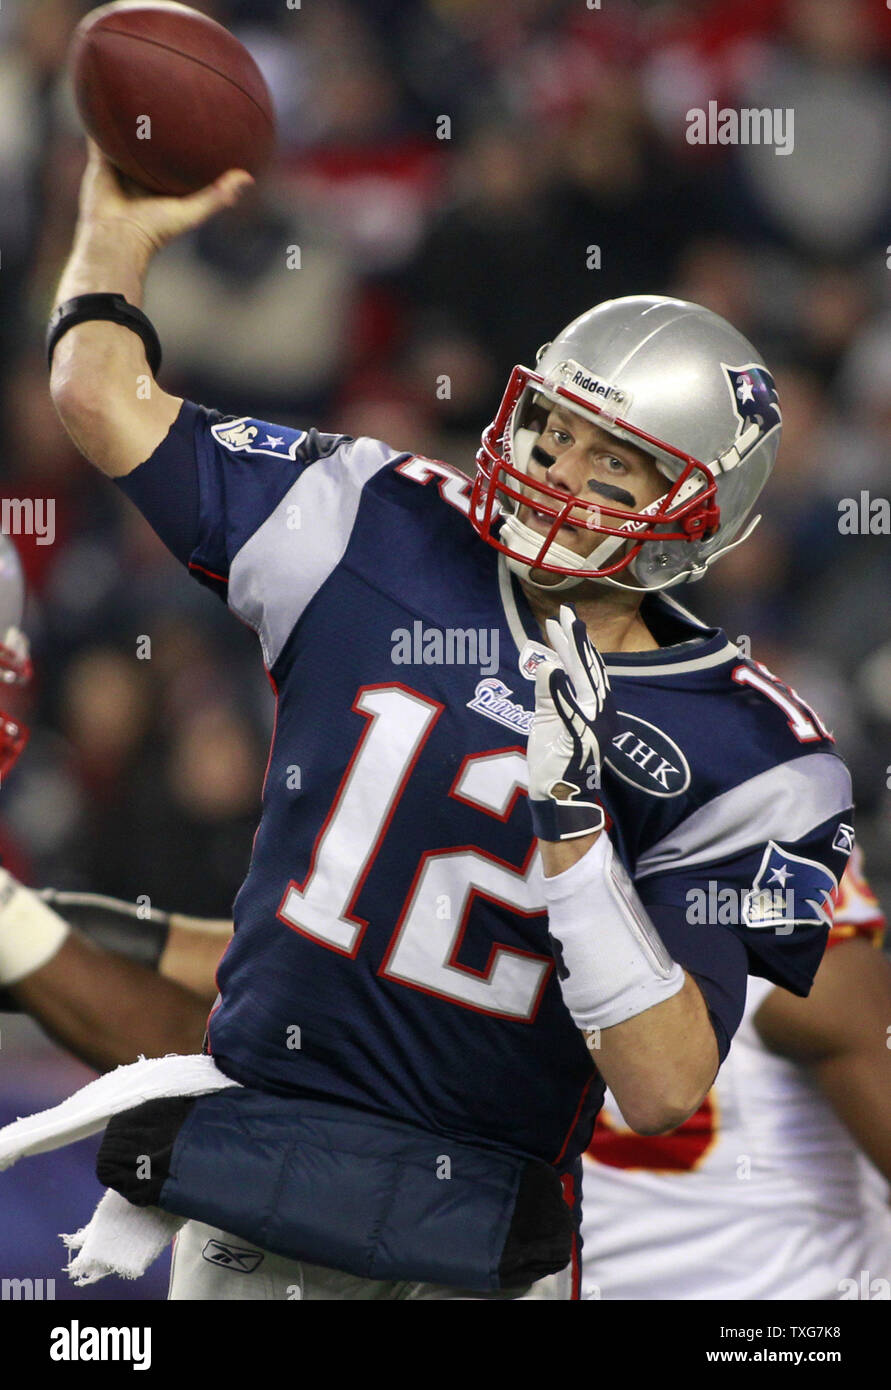 New England Patriots quarterback Tom Brady (12) throws a pass in the second quarter against the Kansas City Chiefs at Gillette Stadium in Foxboro, Massachusetts on November 21, 2011.    UPI/Matthew Healey Stock Photo